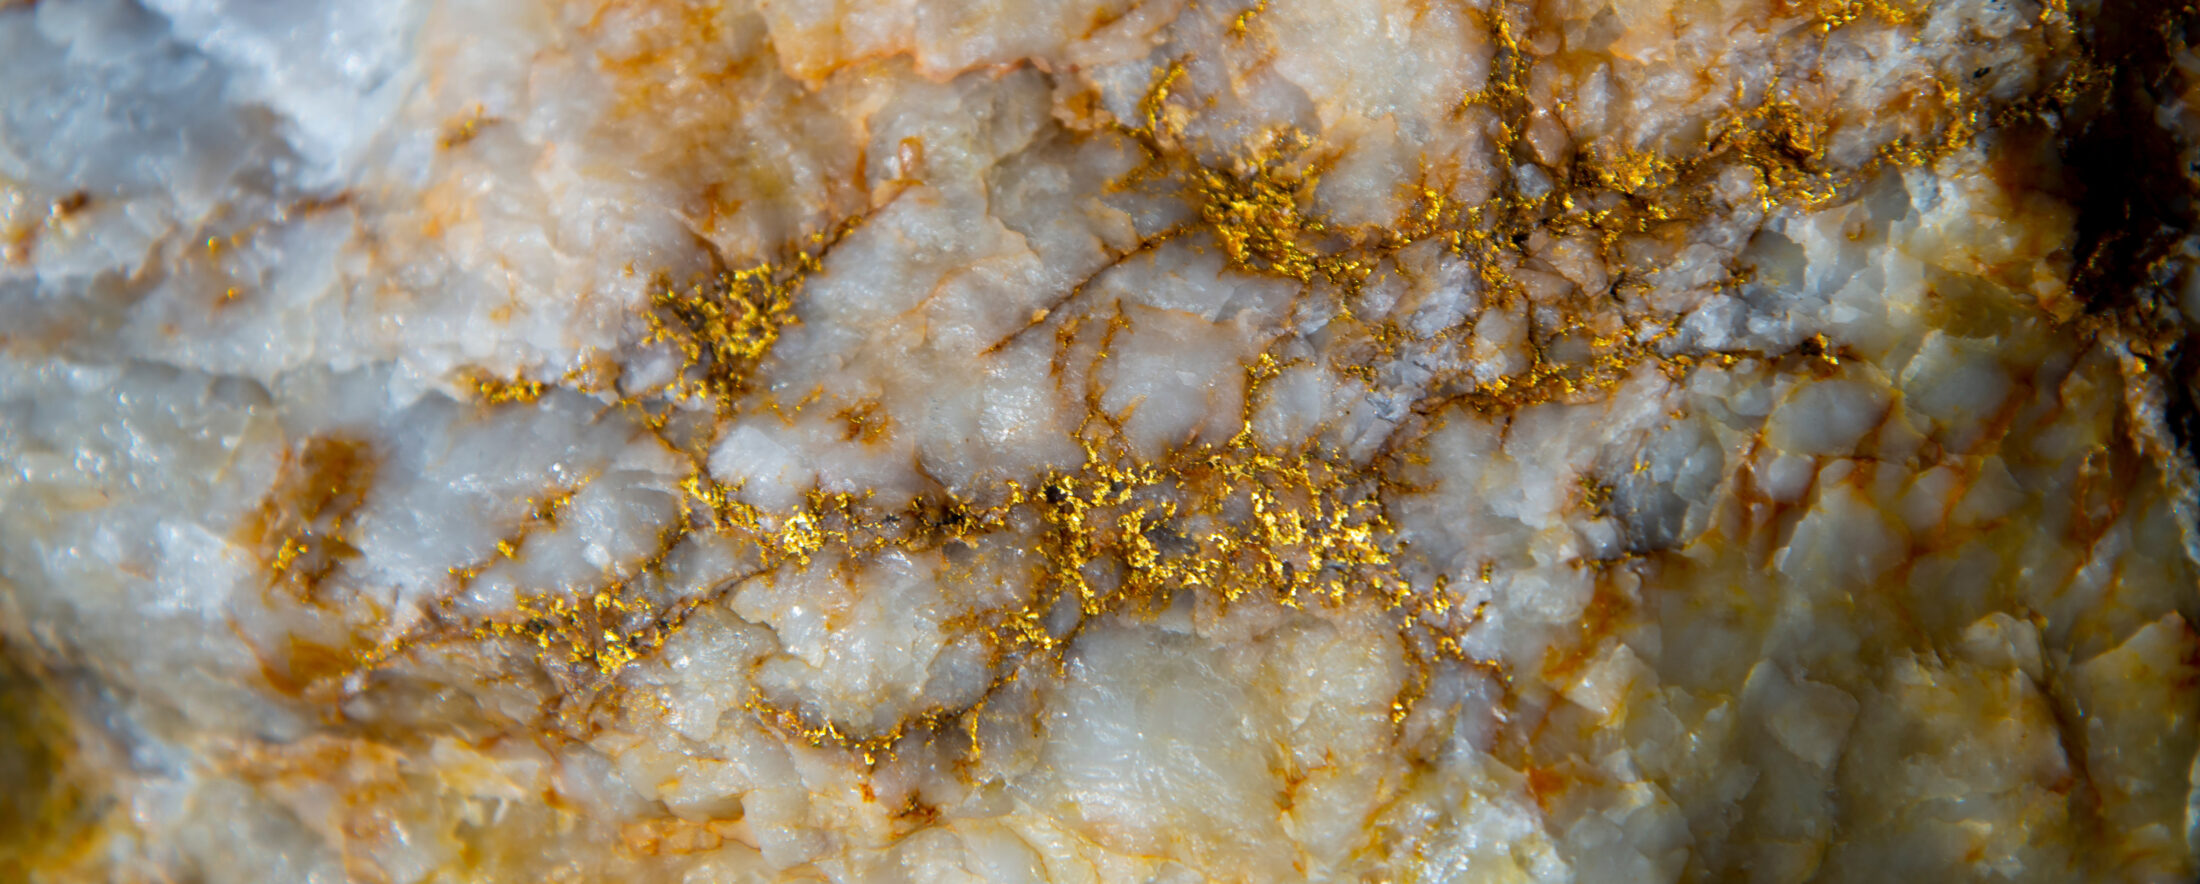 A vein of gold in its natural state embedded in quartz.